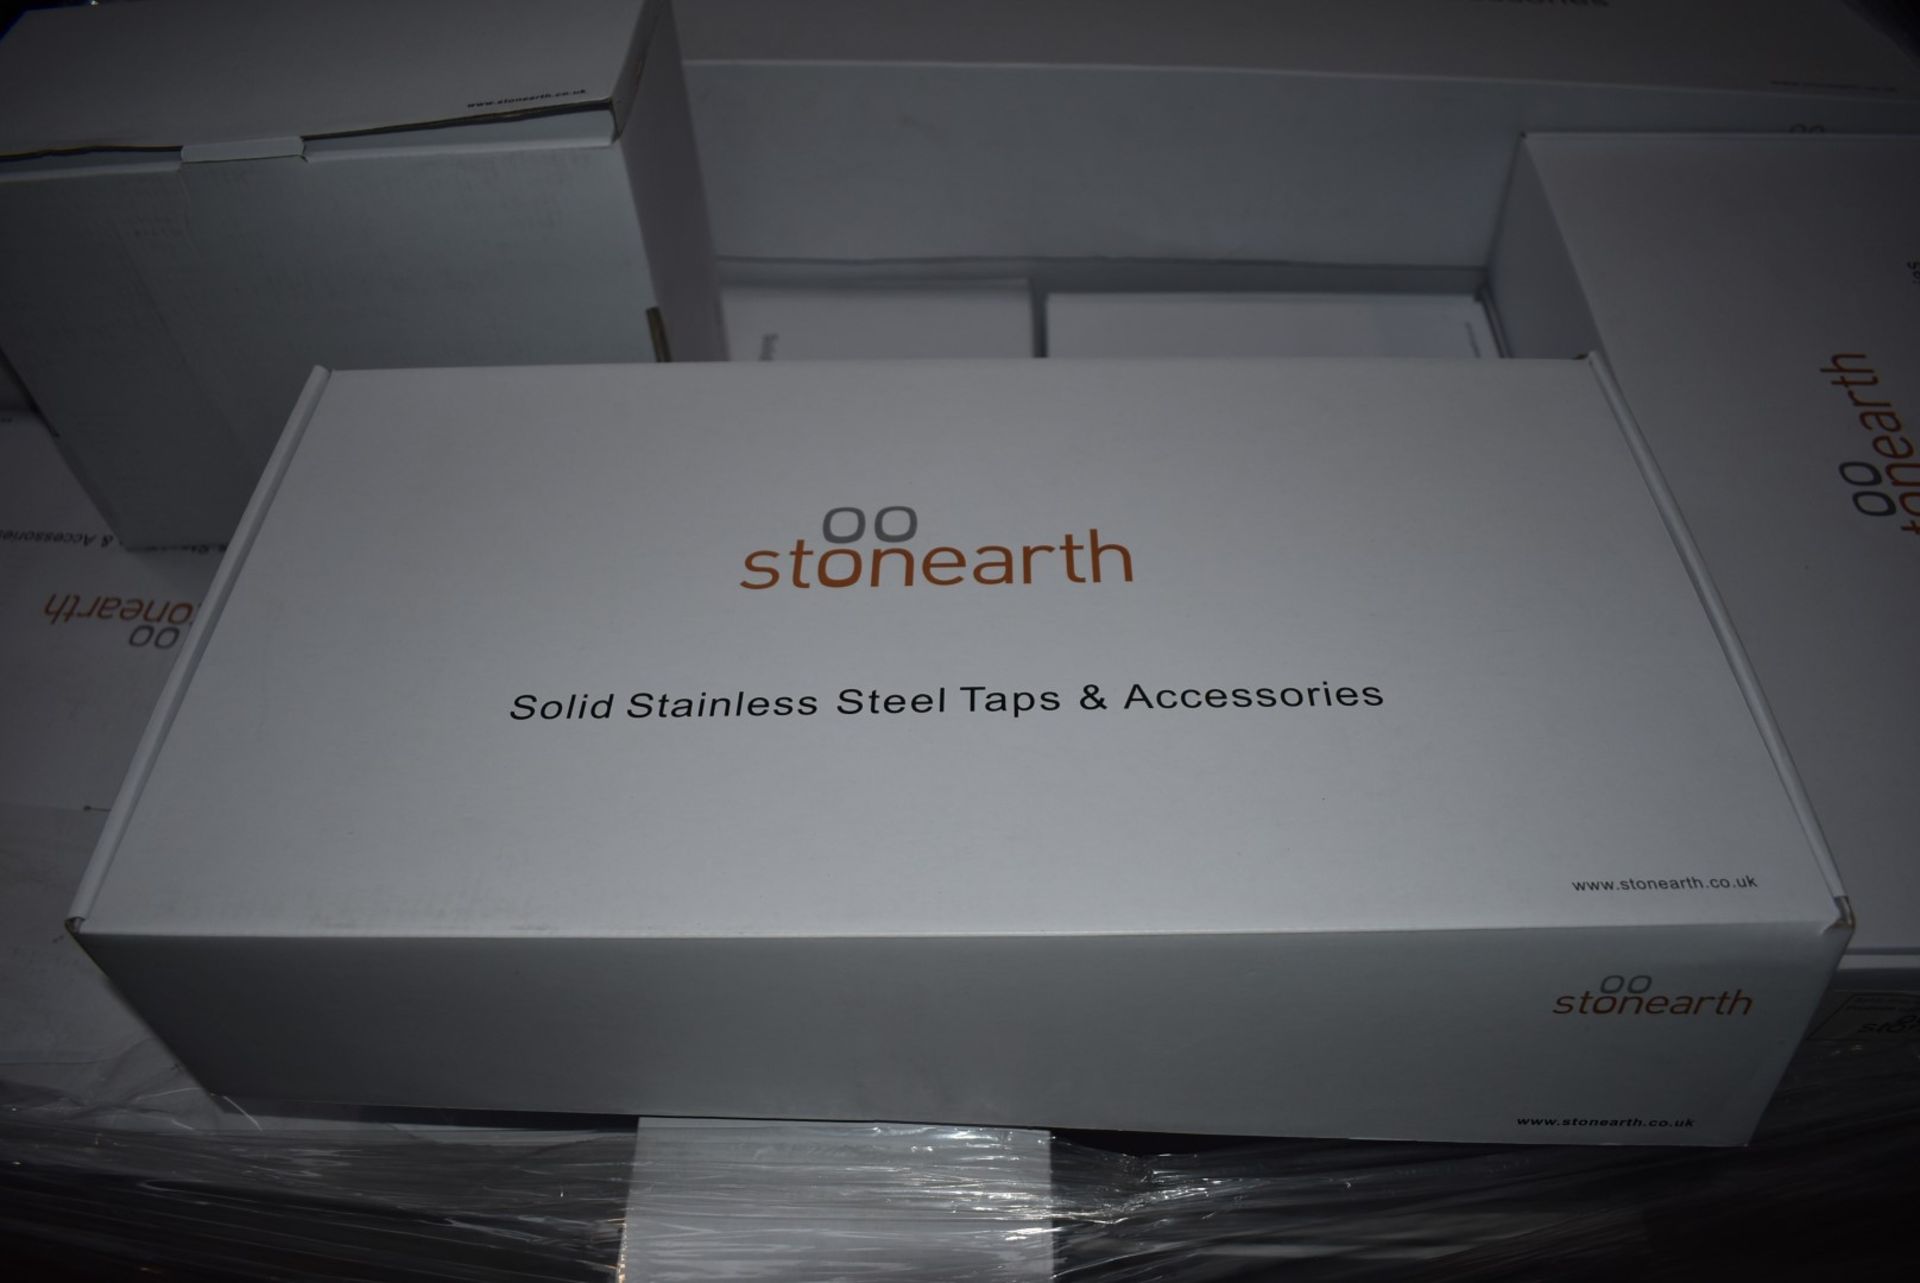 1 x Stonearth Bath Waste Kit With Stainless Steel Covers - Brand New & Boxed - RRP £125 - Ref: TP893 - Image 7 of 10